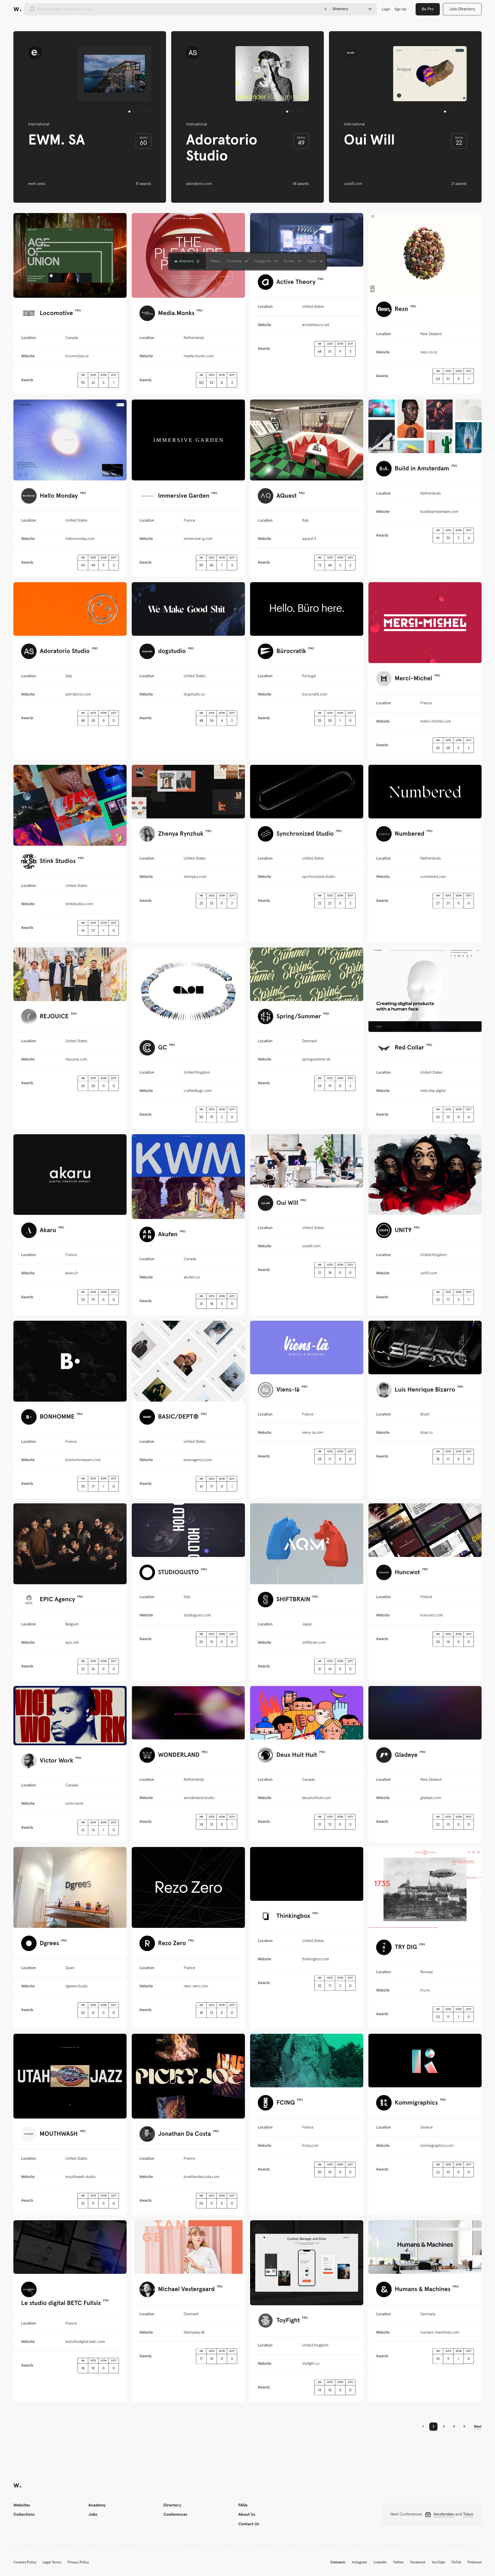 Awwwards Landing Page Example: Awwwards are the Website Awards that recognize and promote the talent and effort of the best developers, designers and web agencies in the world.